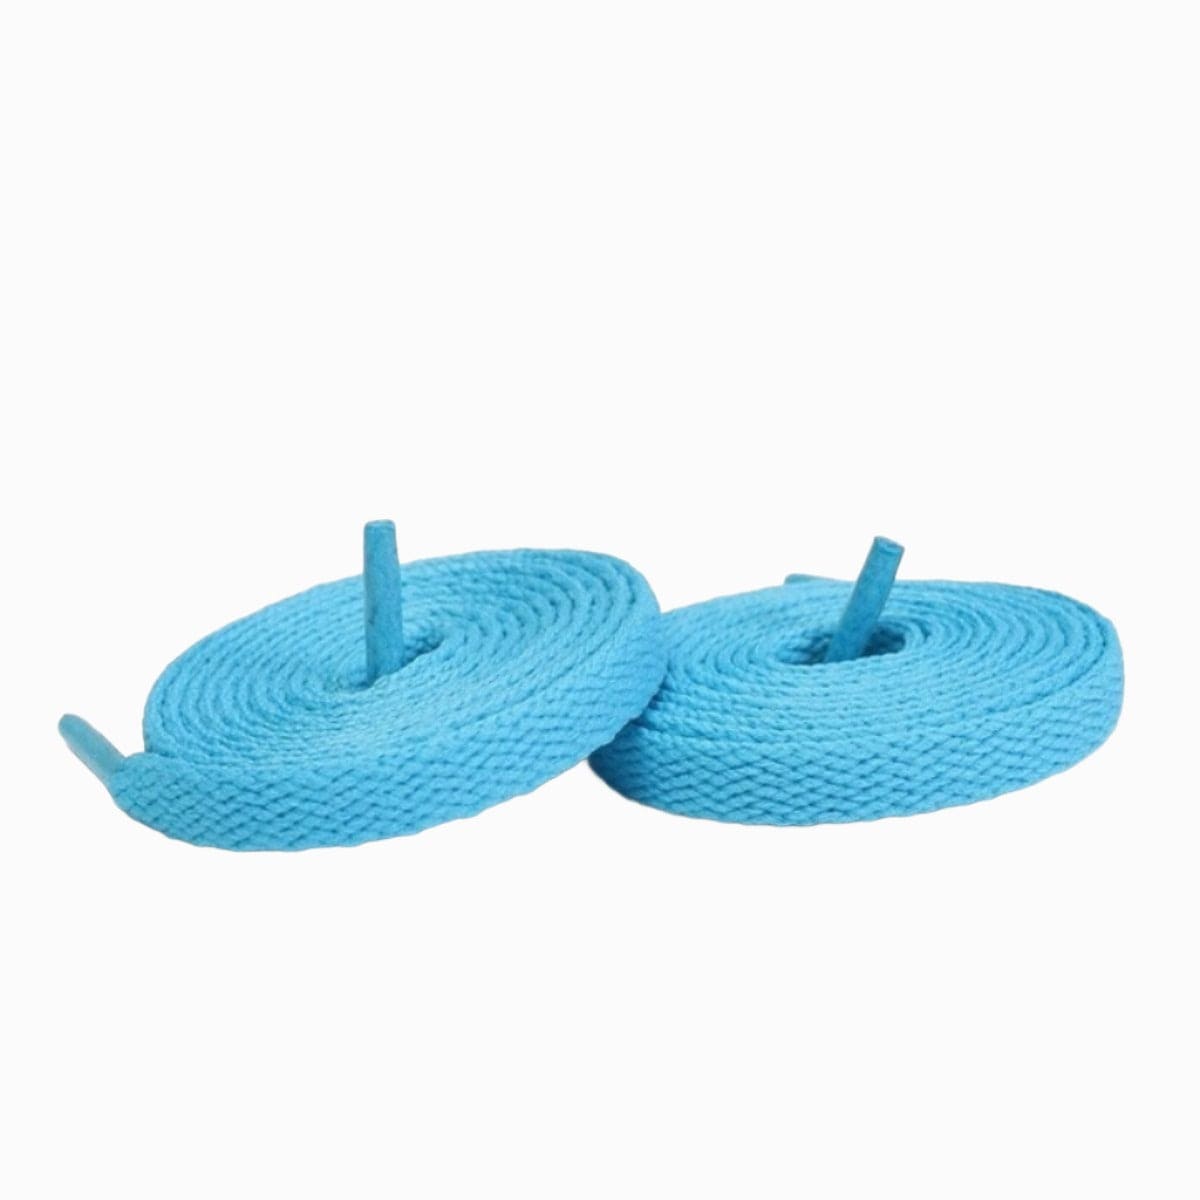 Pastel Blue Replacement Adidas Shoe Laces for Adidas Handball Spezial Sneakers by Kicks Shoelaces